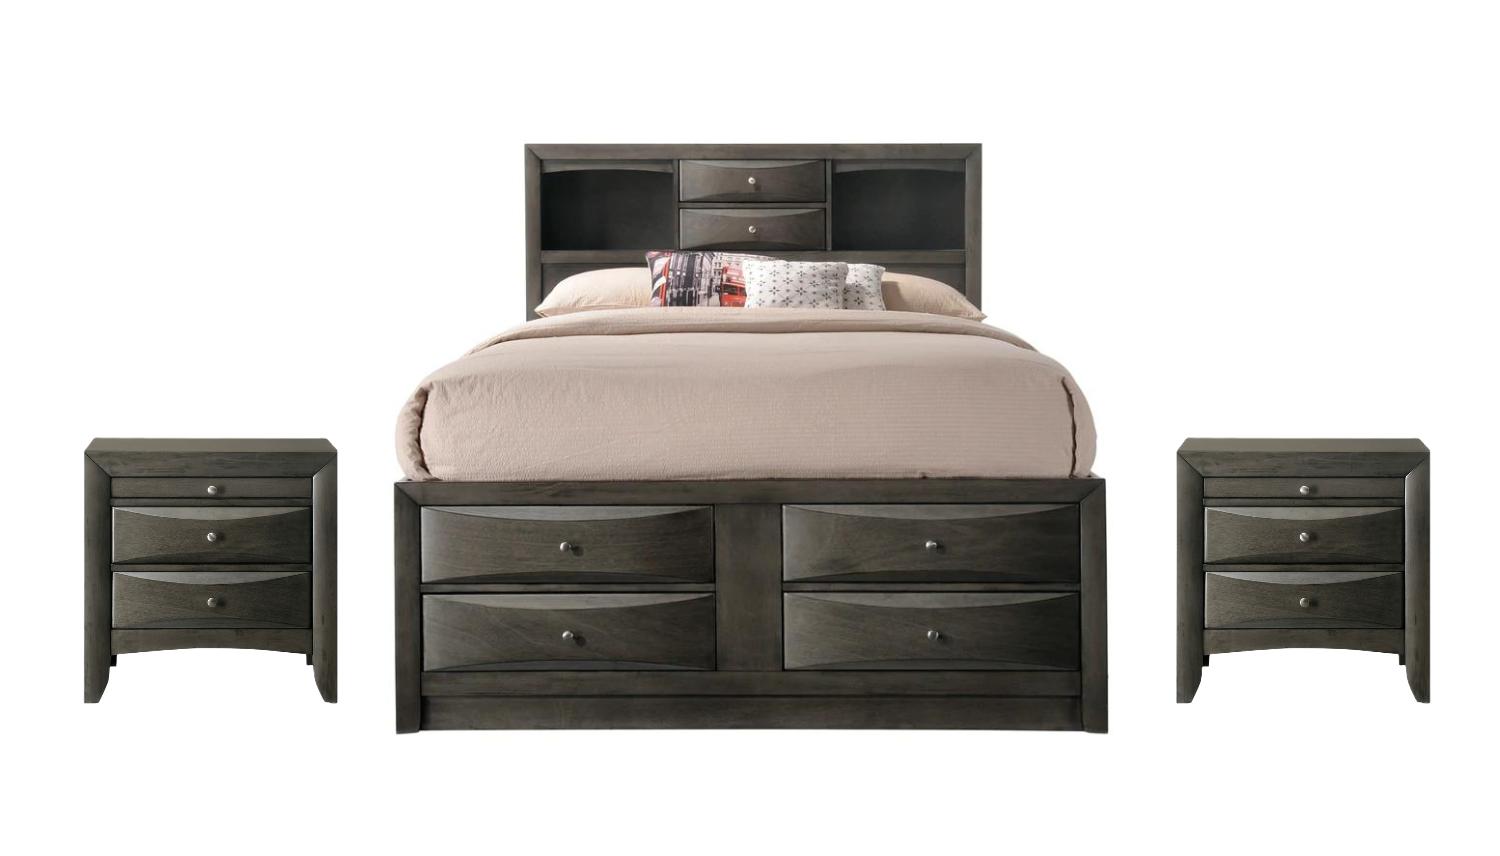 

    
Gray Storage Bedroom Set by Crown Mark Emily B4275-Q-Bed-3pcs
